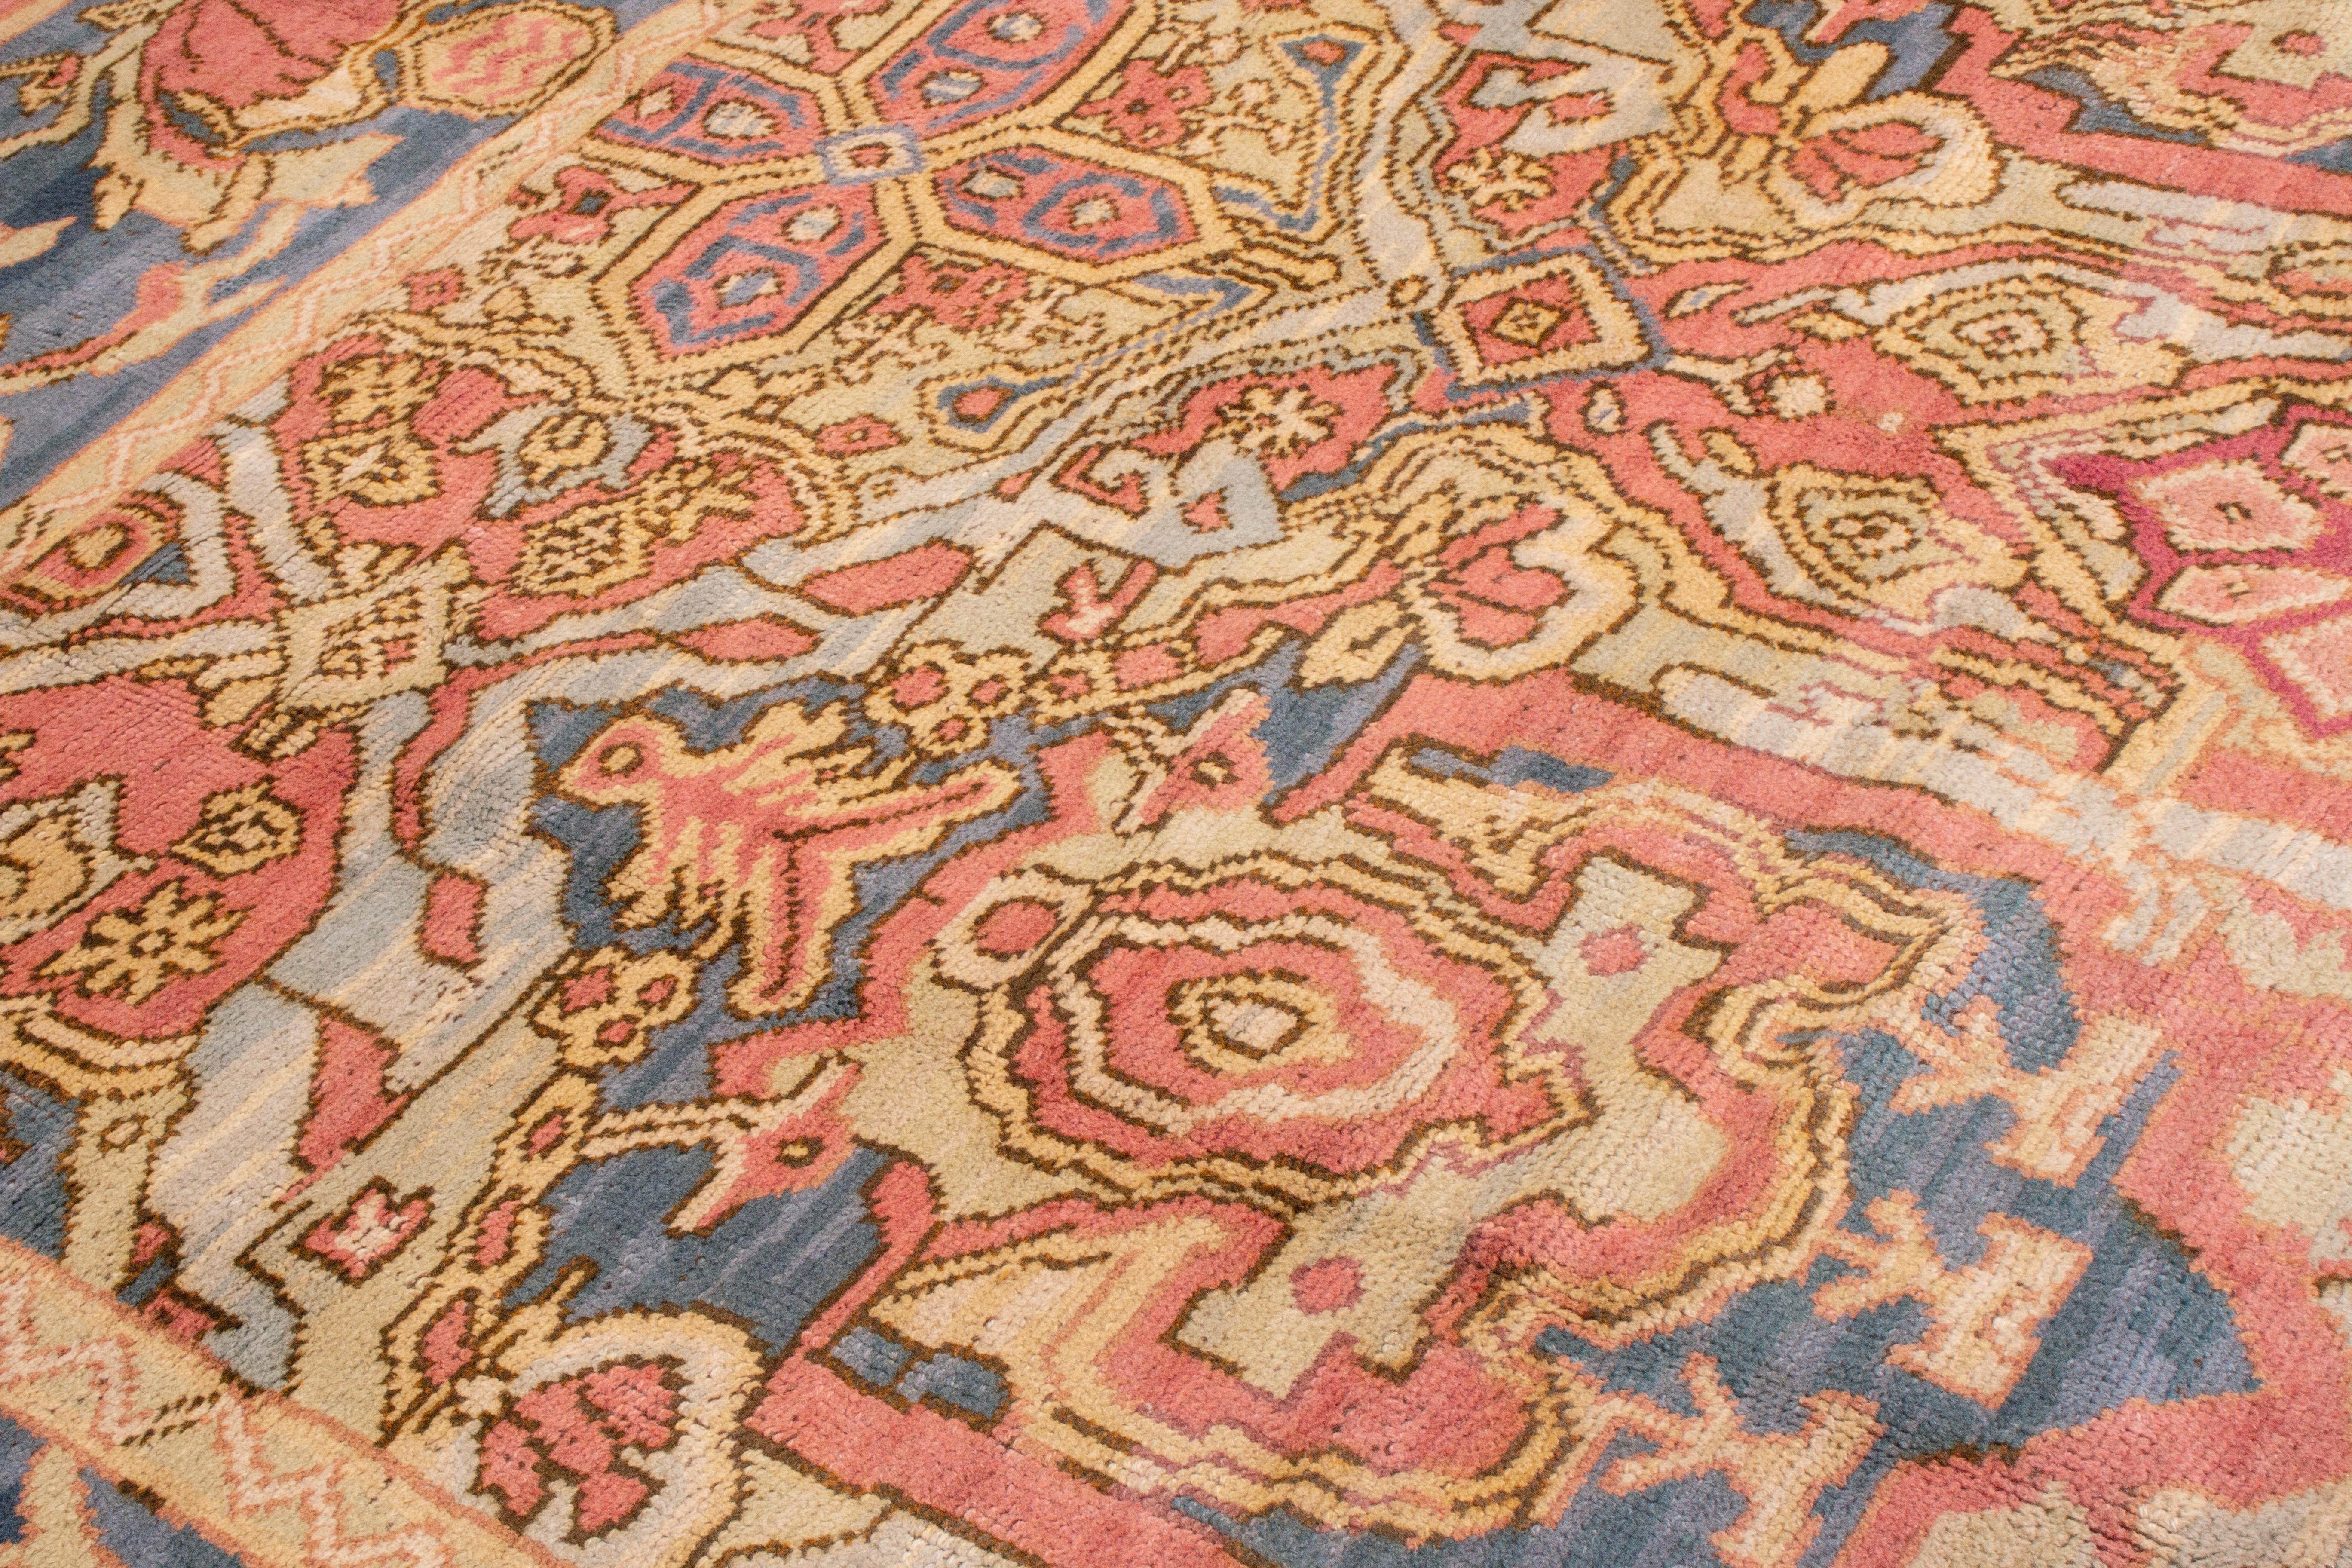 Hand-Knotted Antique Early Spanish Arts & Crafts Red and Blue Wool Rug